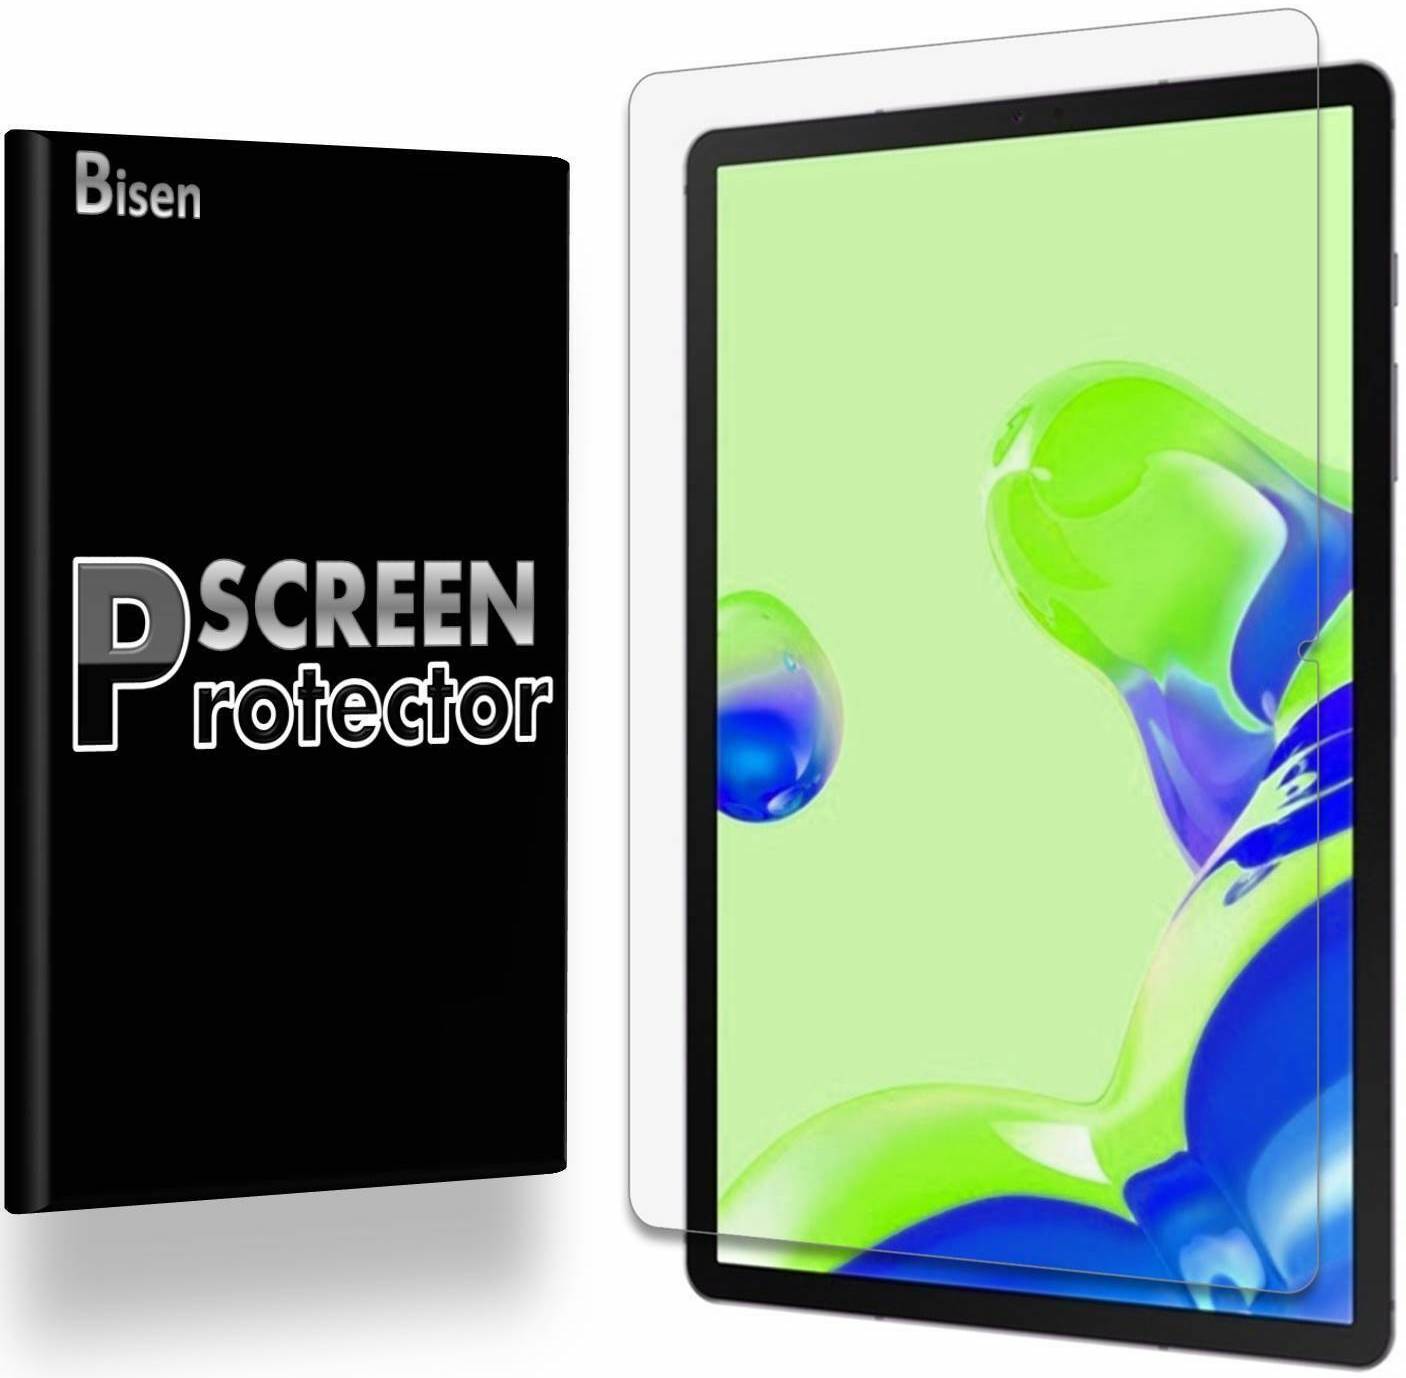 https://www.androidcentral.com/sites/androidcentral.com/files/article_images/2020/09/bisen-ultra-clear-screen-protector-galaxy-tab-s7.jpeg